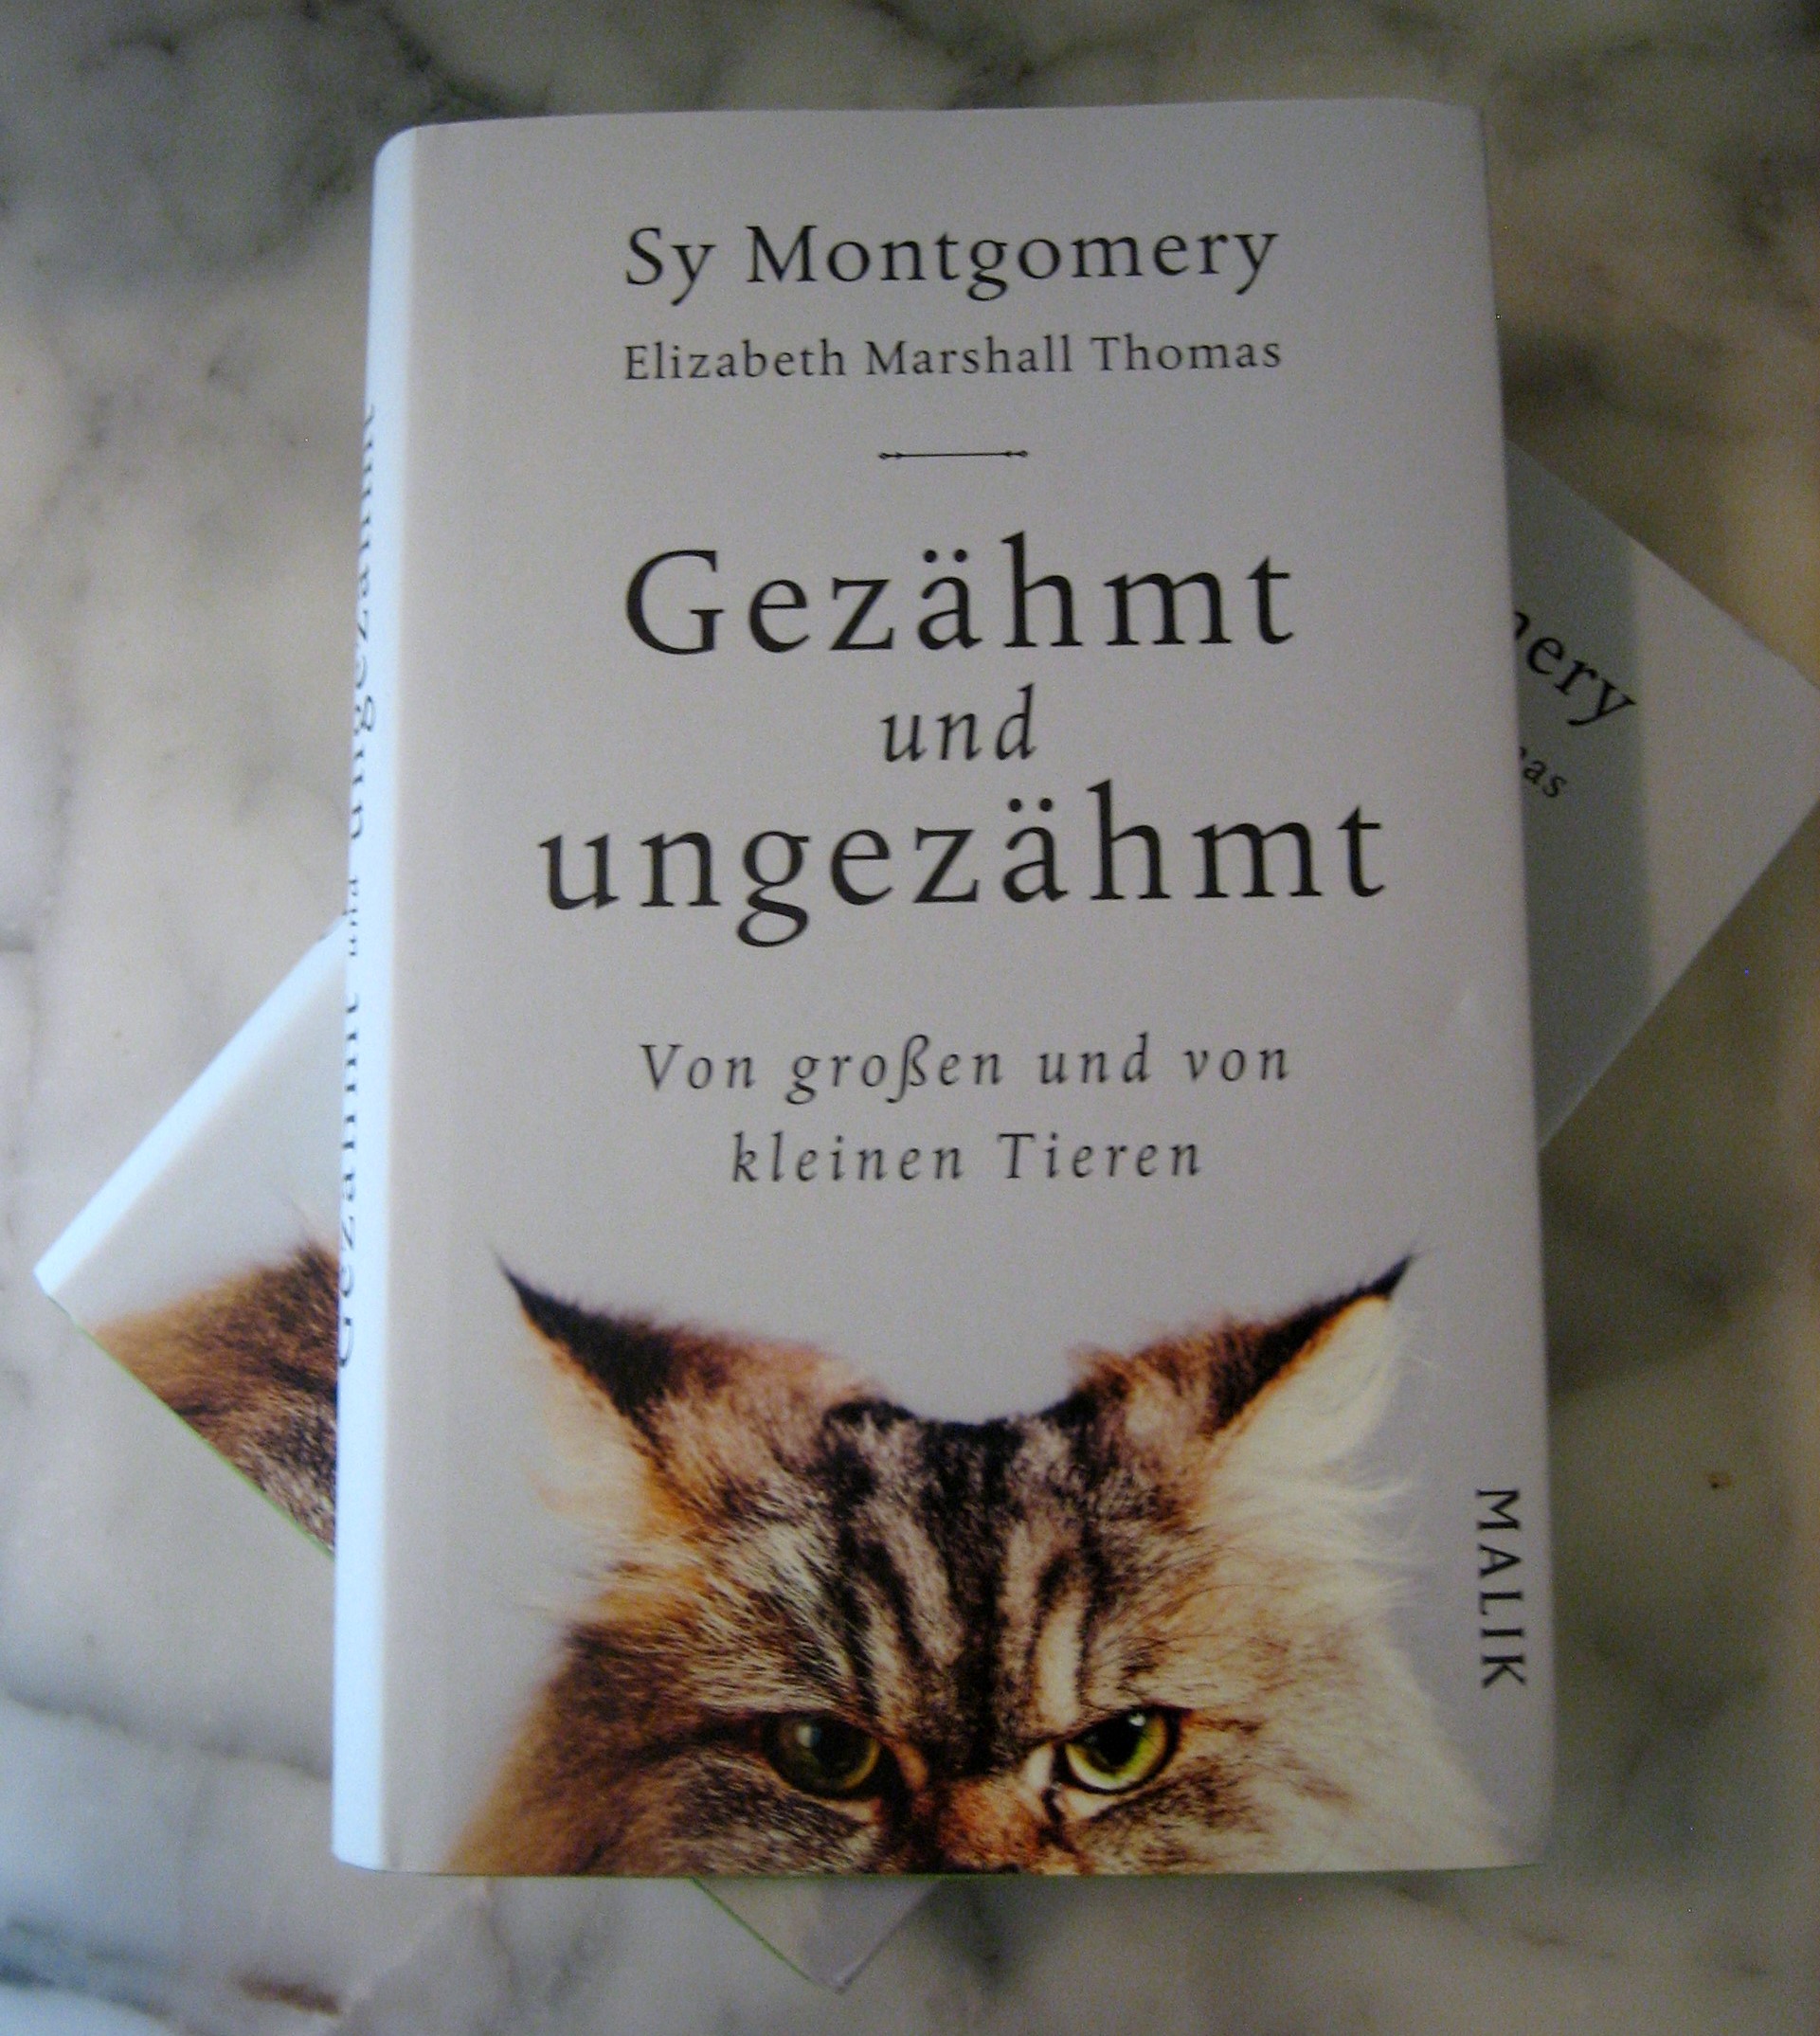 The German edition of Tamed and Untamed is now available.